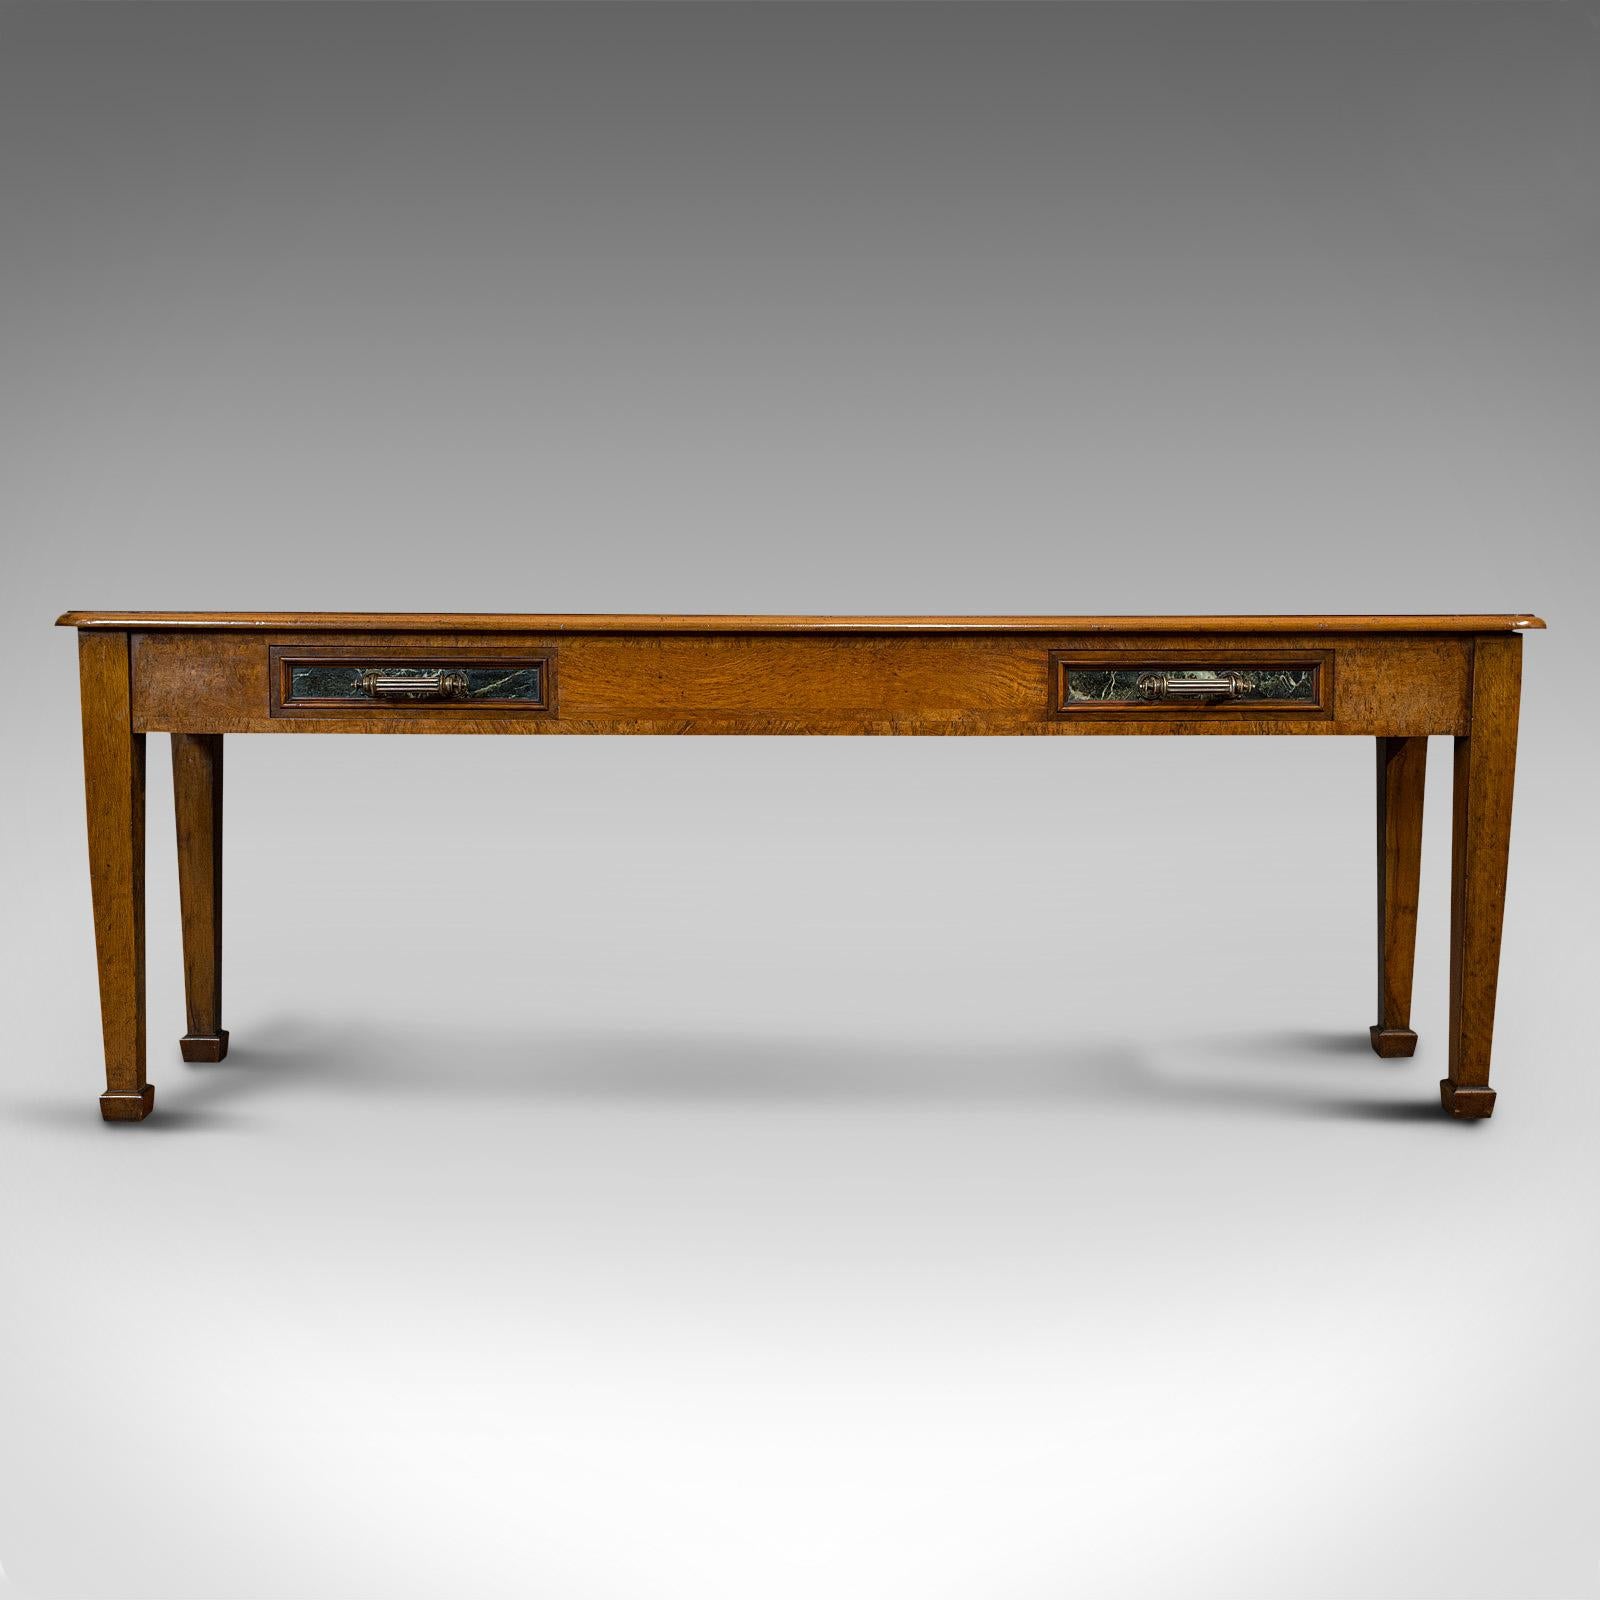 This is an antique console table. A large, Scottish walnut and oak desk or hall table by J & T Scott of Edinburgh, dating to the Victorian period, circa 1880.

Exquisite Scottish furniture
Displays a desirable aged patina
Walnut tabletop offers